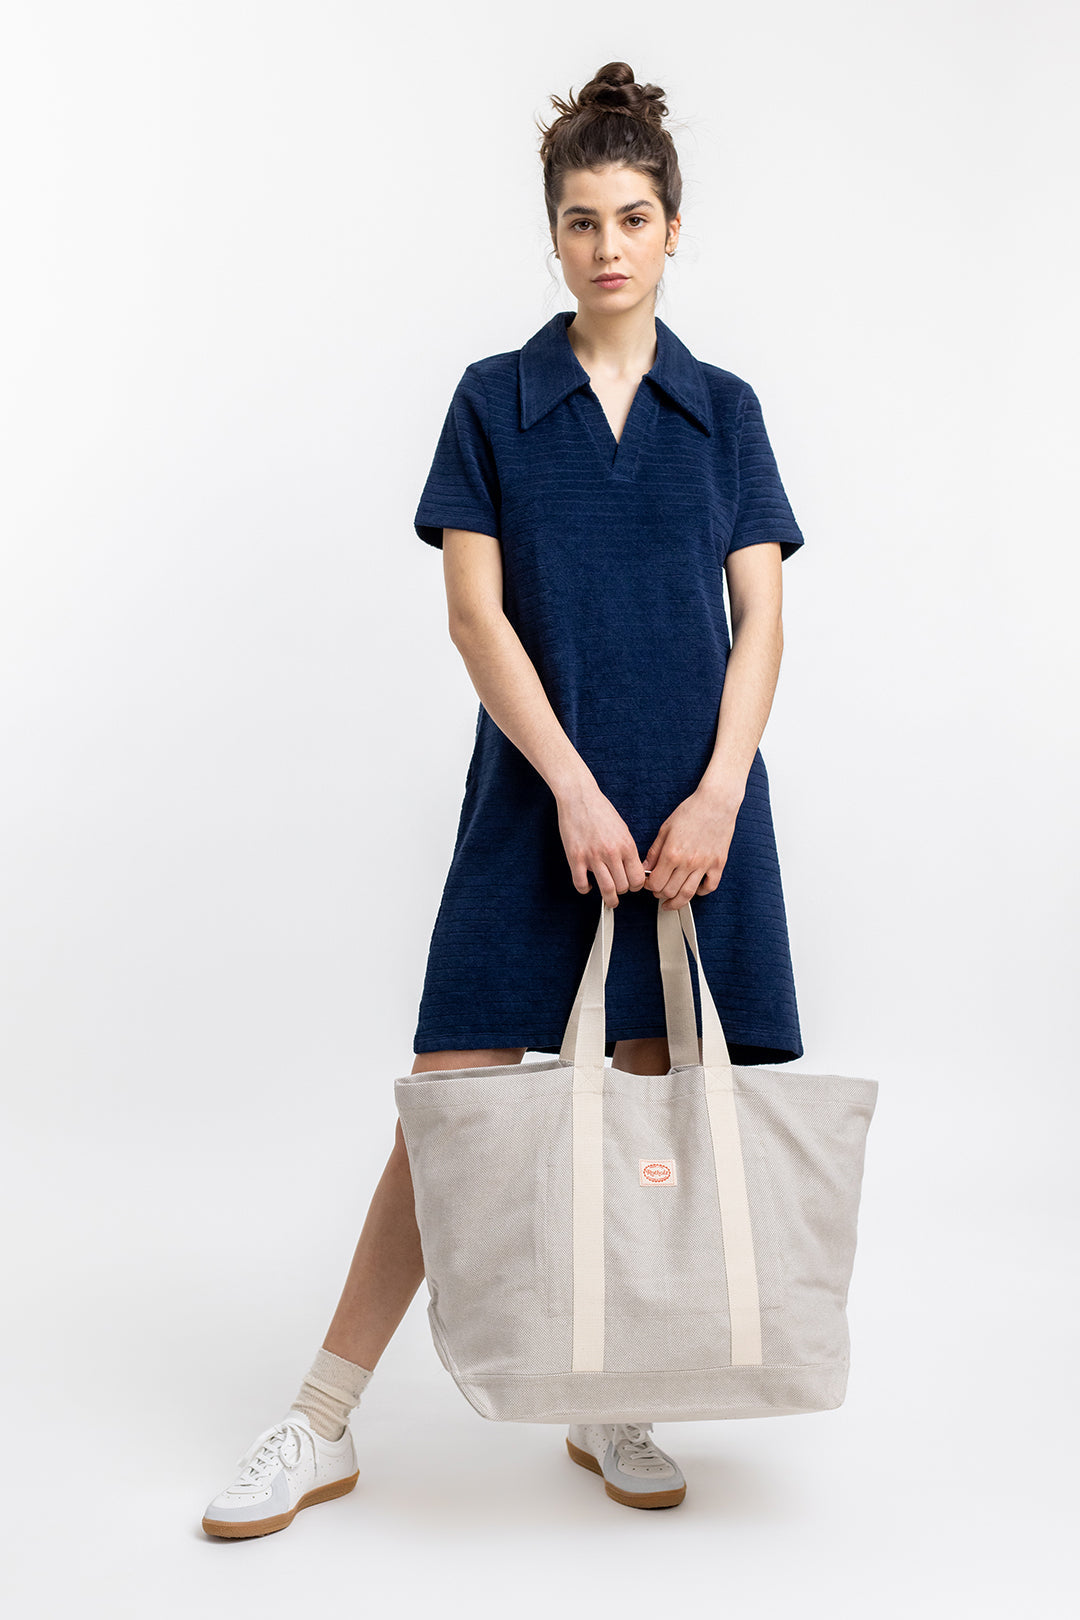 Dark blue polo dress made from 100% organic cotton from Rotholz